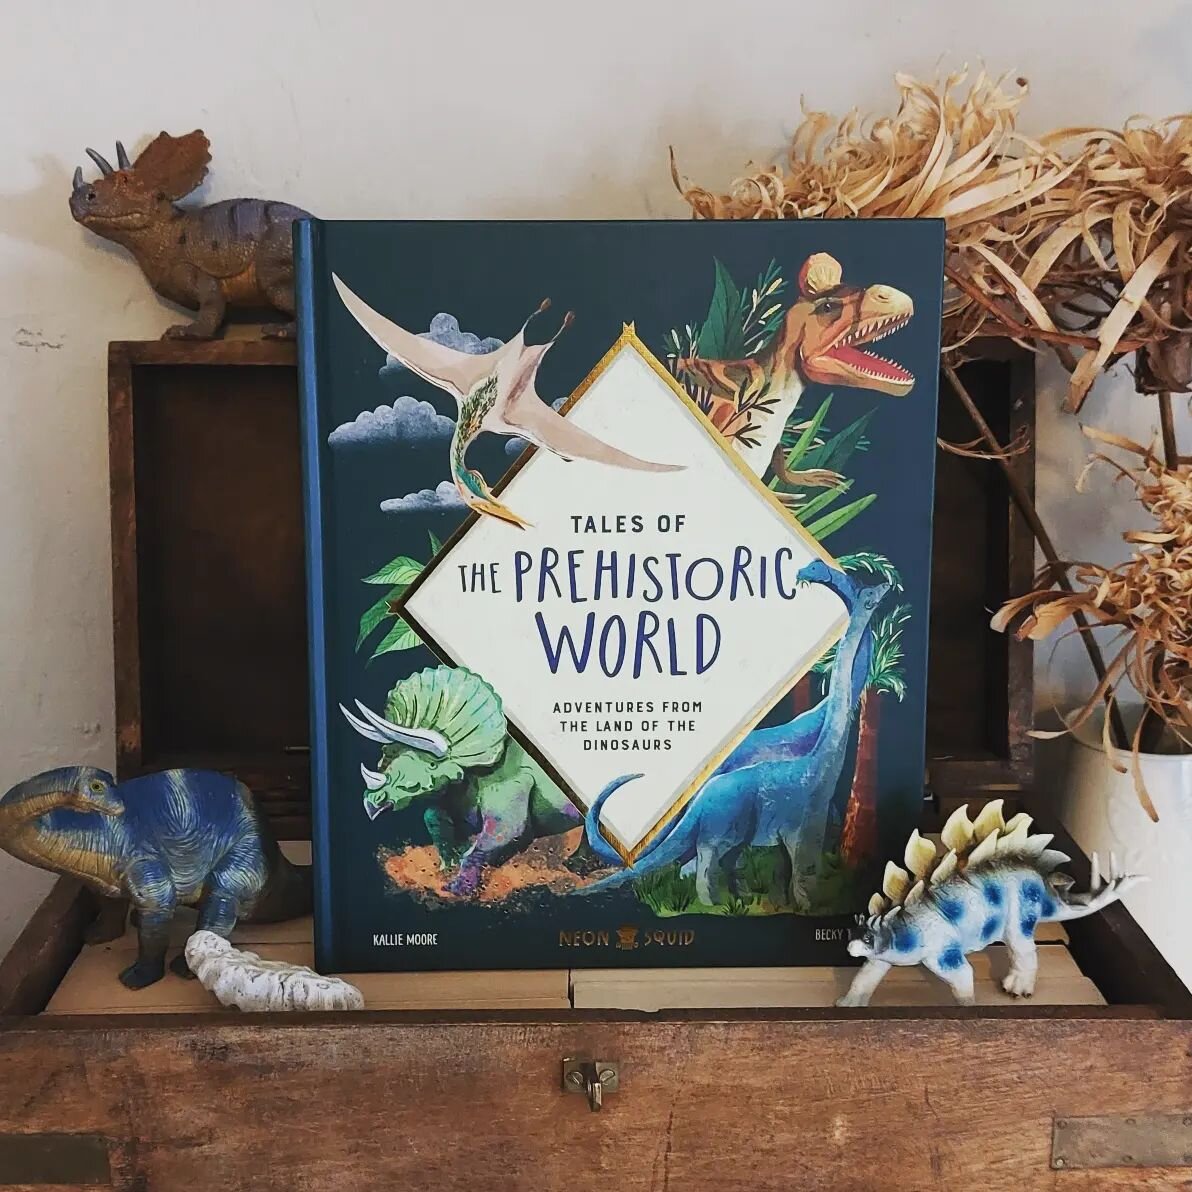 [Ad-PR] A ROARSOME READ 📗 Tales of the Prehistoric World✏️Kallie Moore🖌Becky Thornes📚 @neonsquidbooks

An absolute must for Dino lovers, this high quality hardback takes you on a Prehistoric adventure. 

In over 100 short stories, each based on a 